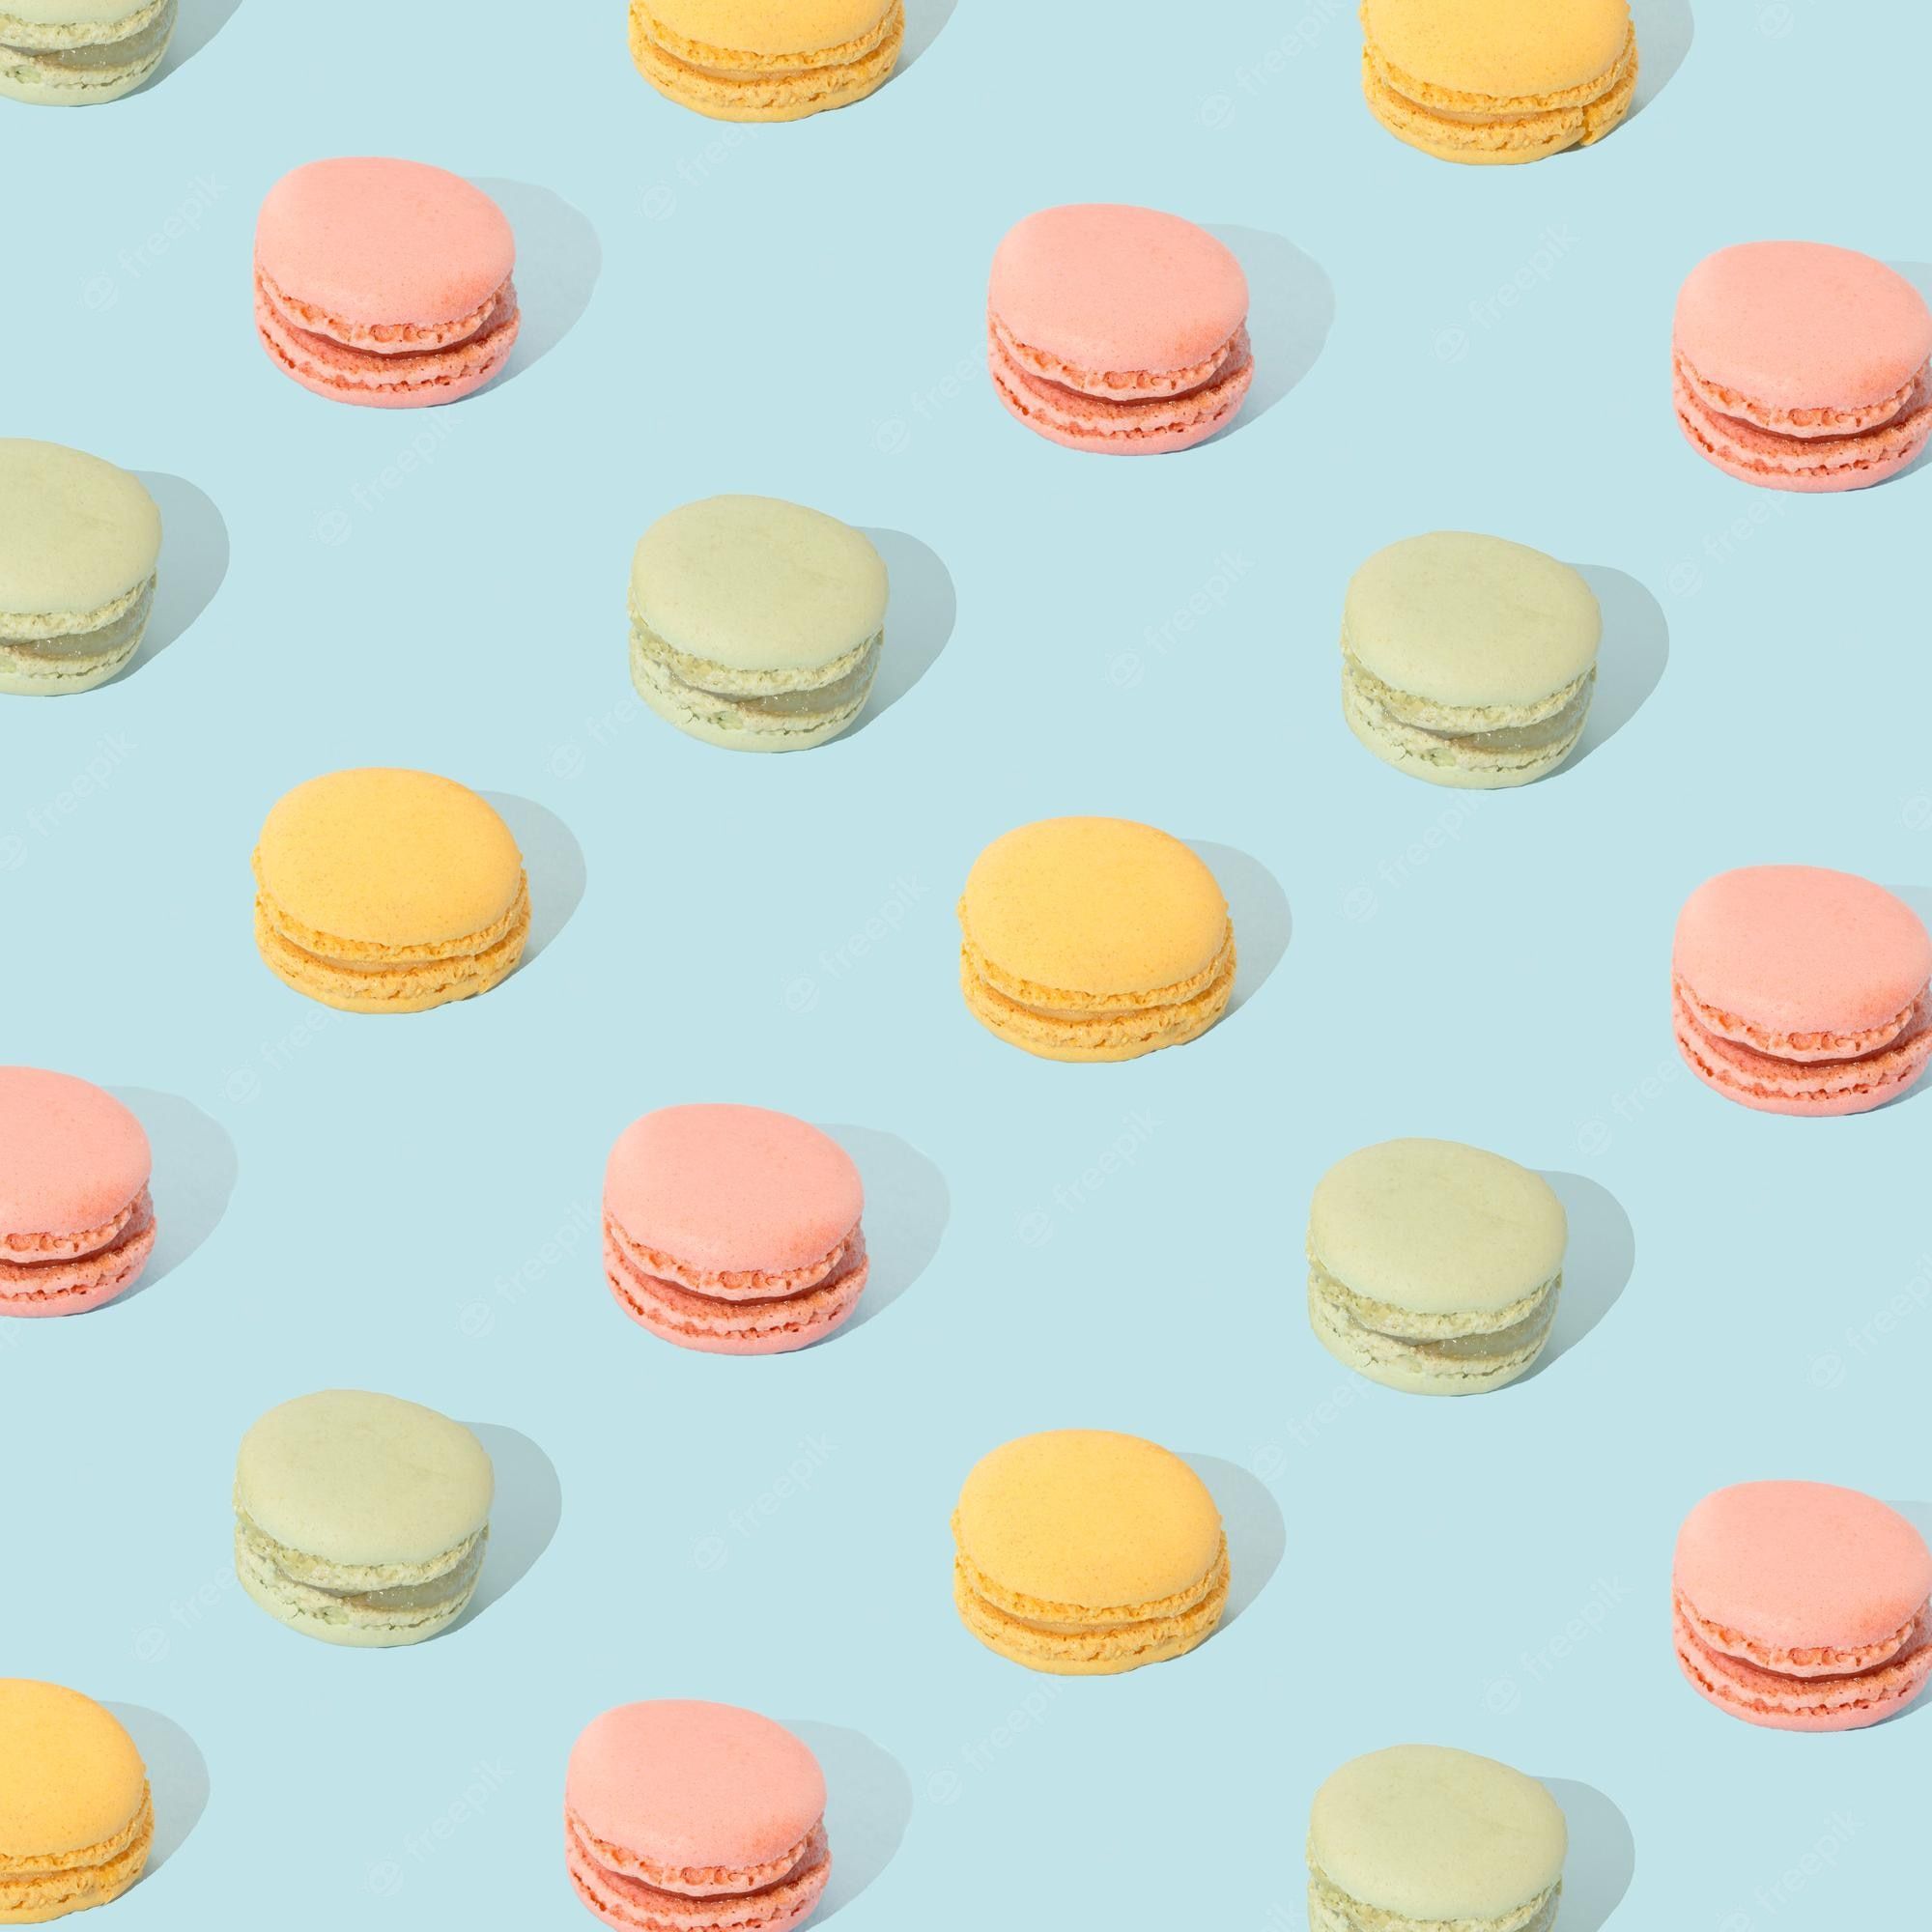 Premium Photo. Sweet food macarons on a blue background colorful aesthetic layout